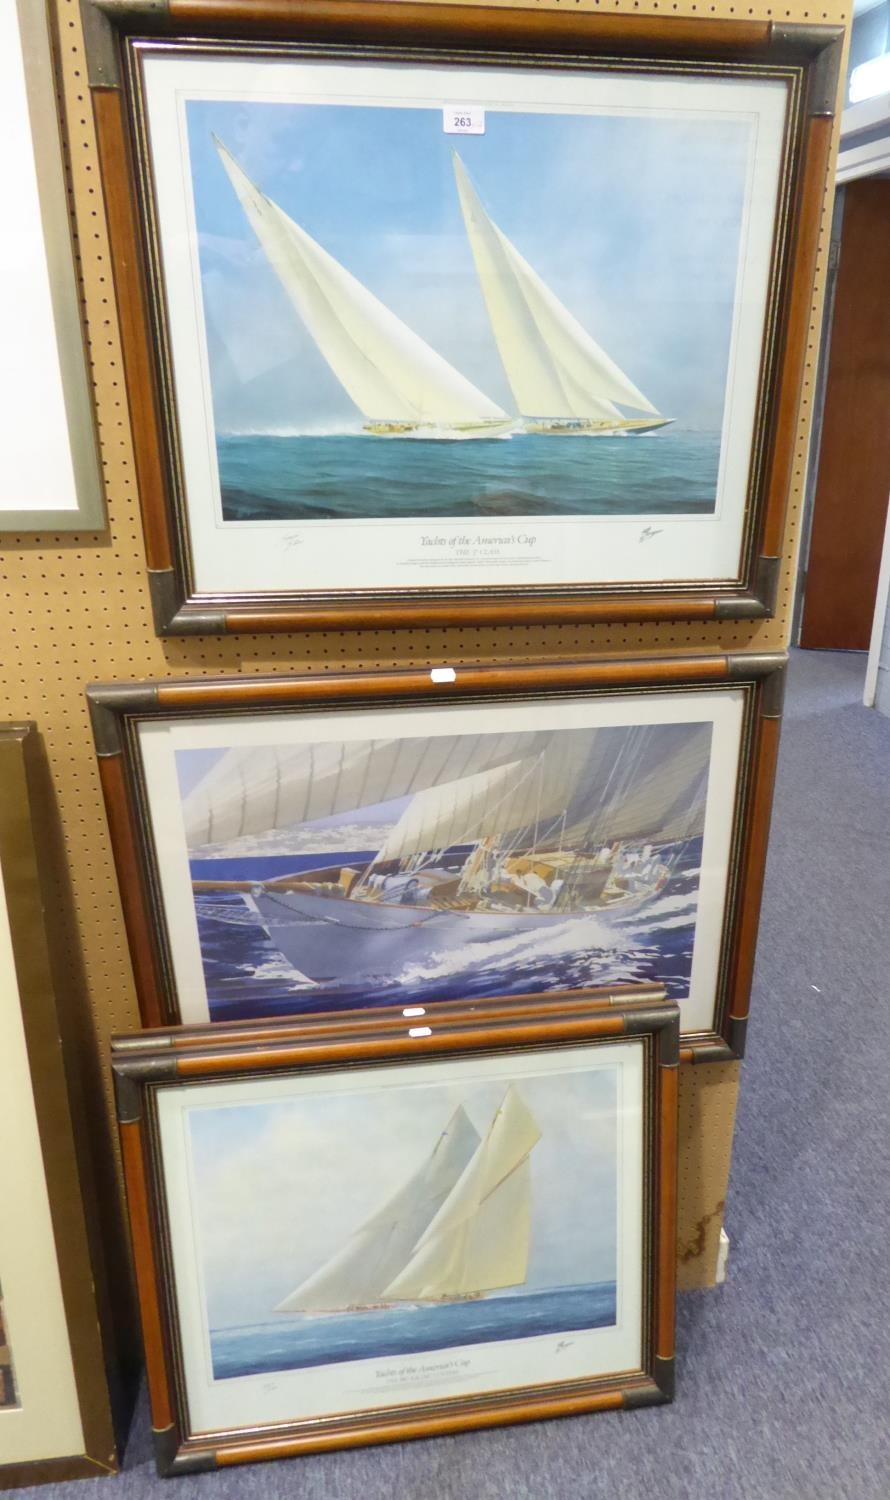 AFTER TIM THOMPSON THREE COLOUR PRINTS ‘Yachts of the America’s Cup’ AFTER ALISTAIR HOUSTON COLOUR